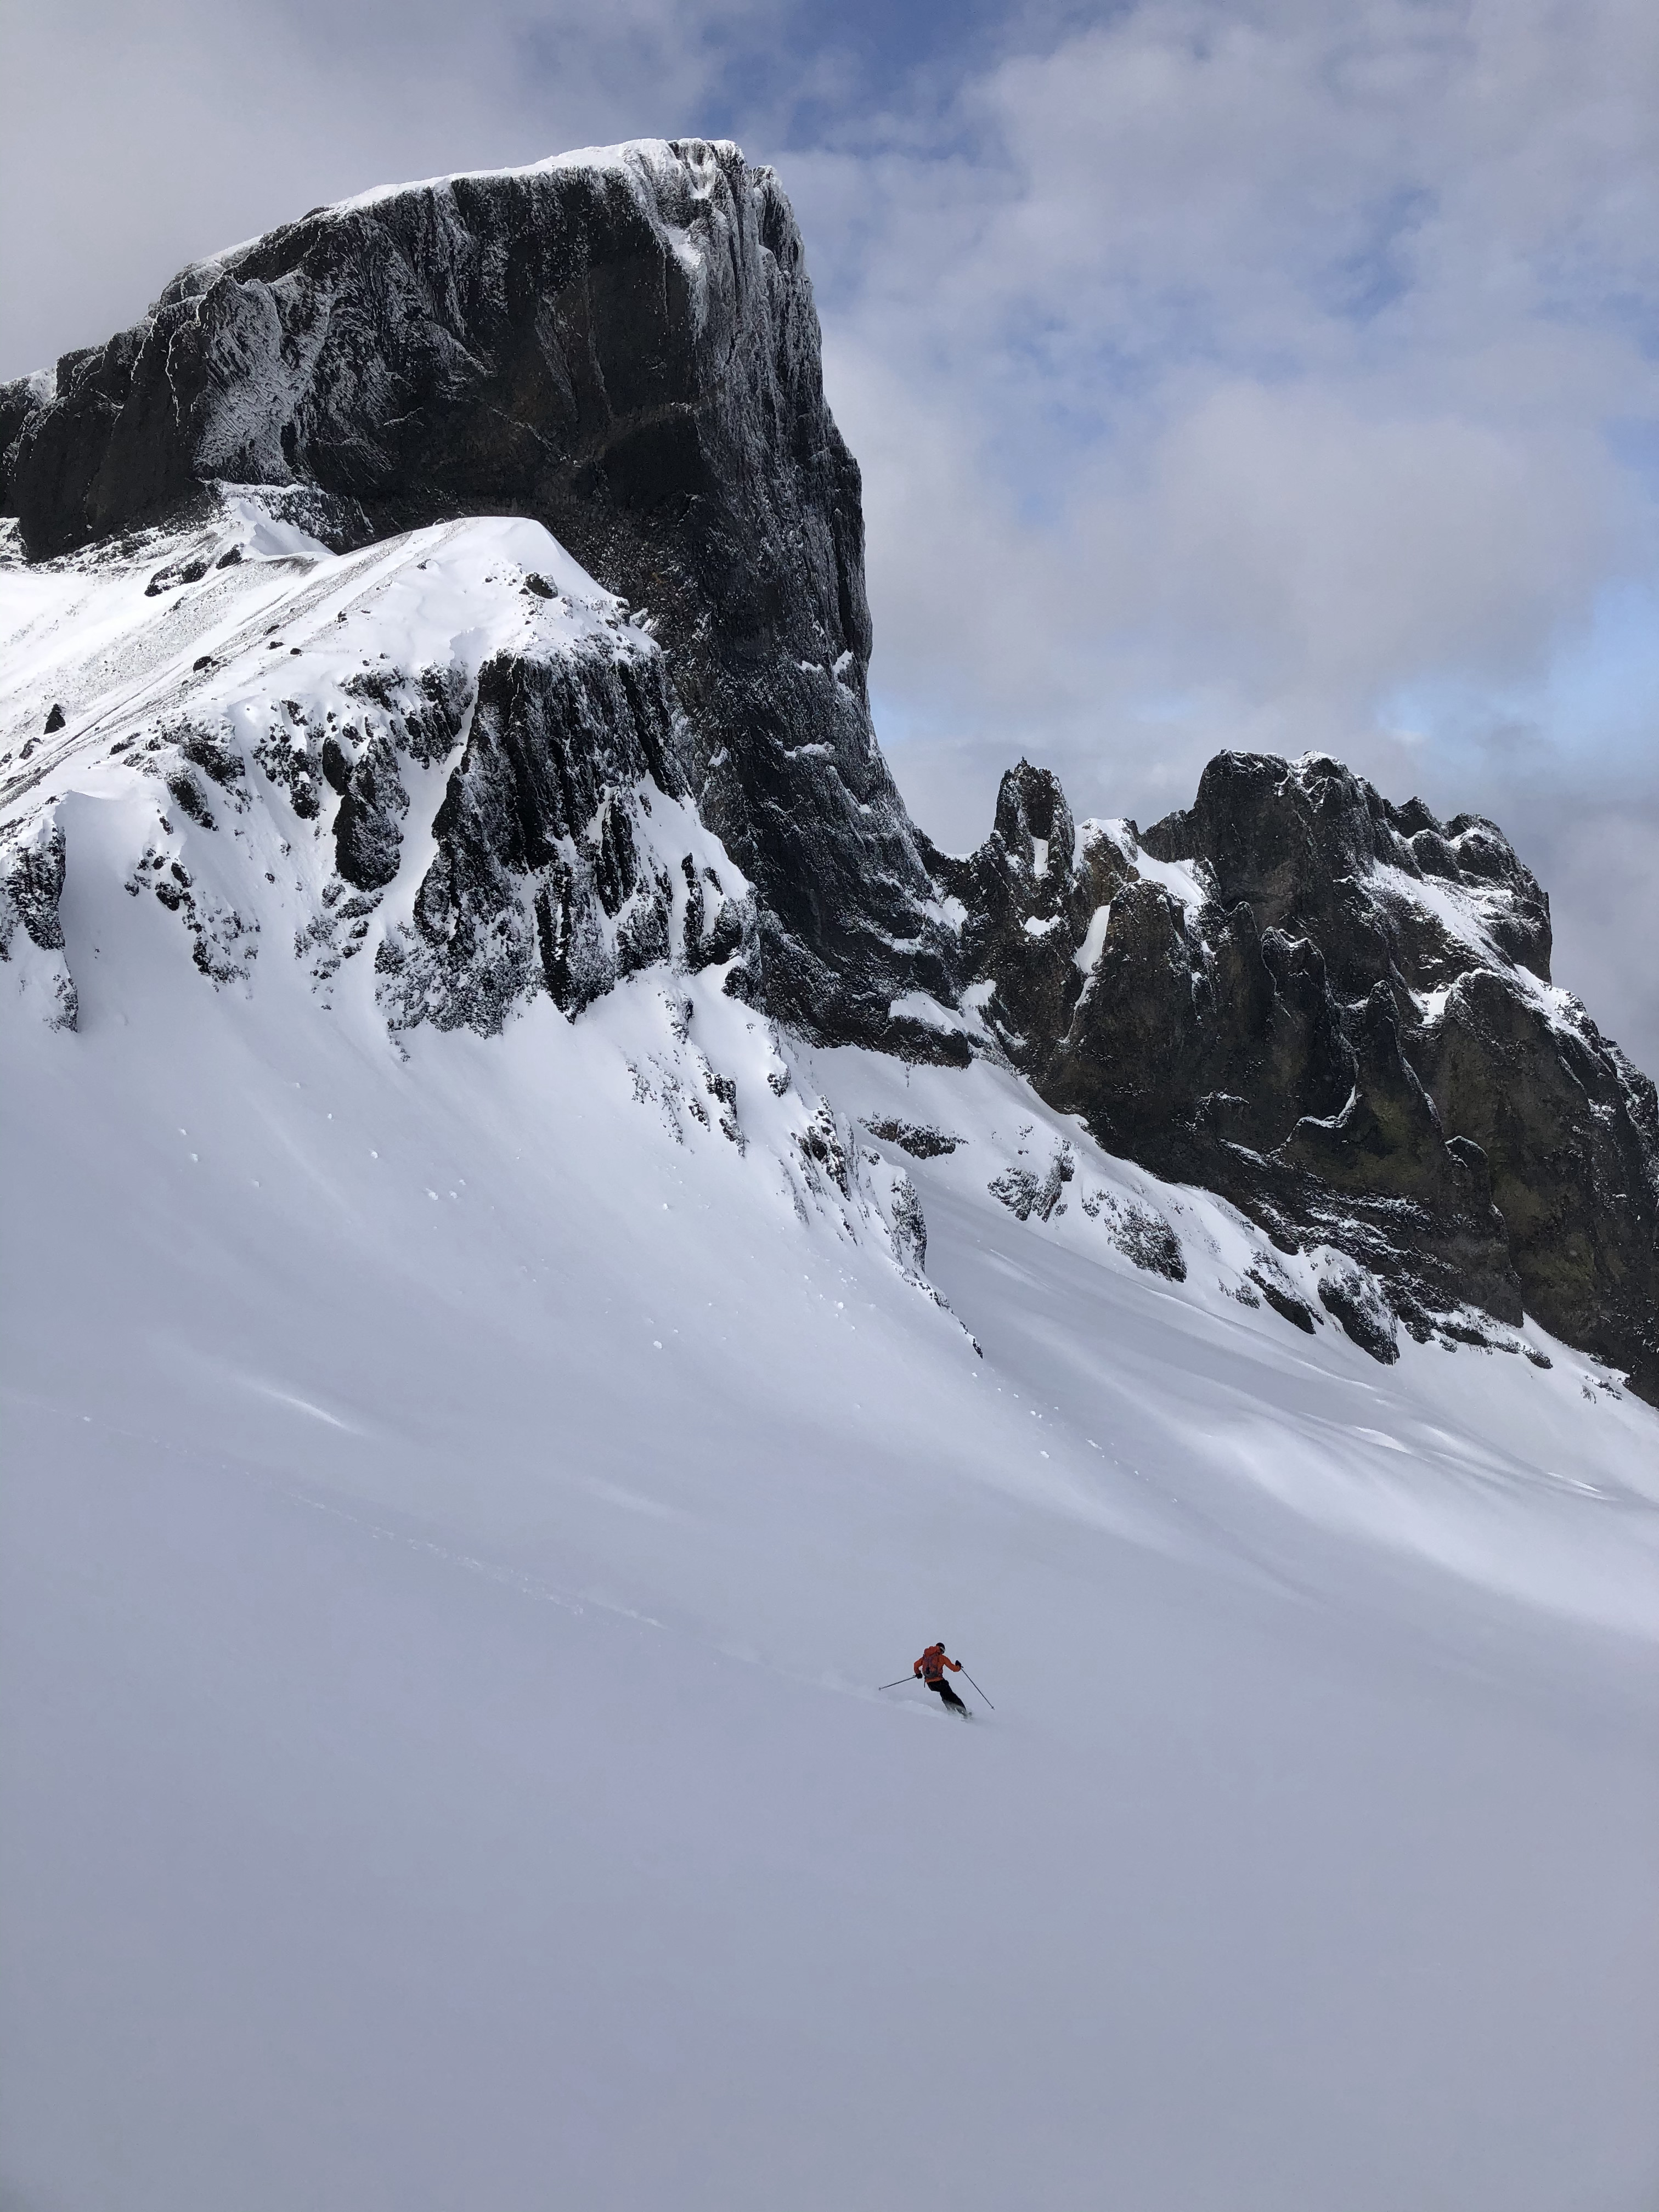 Skiing by the Black Tusk